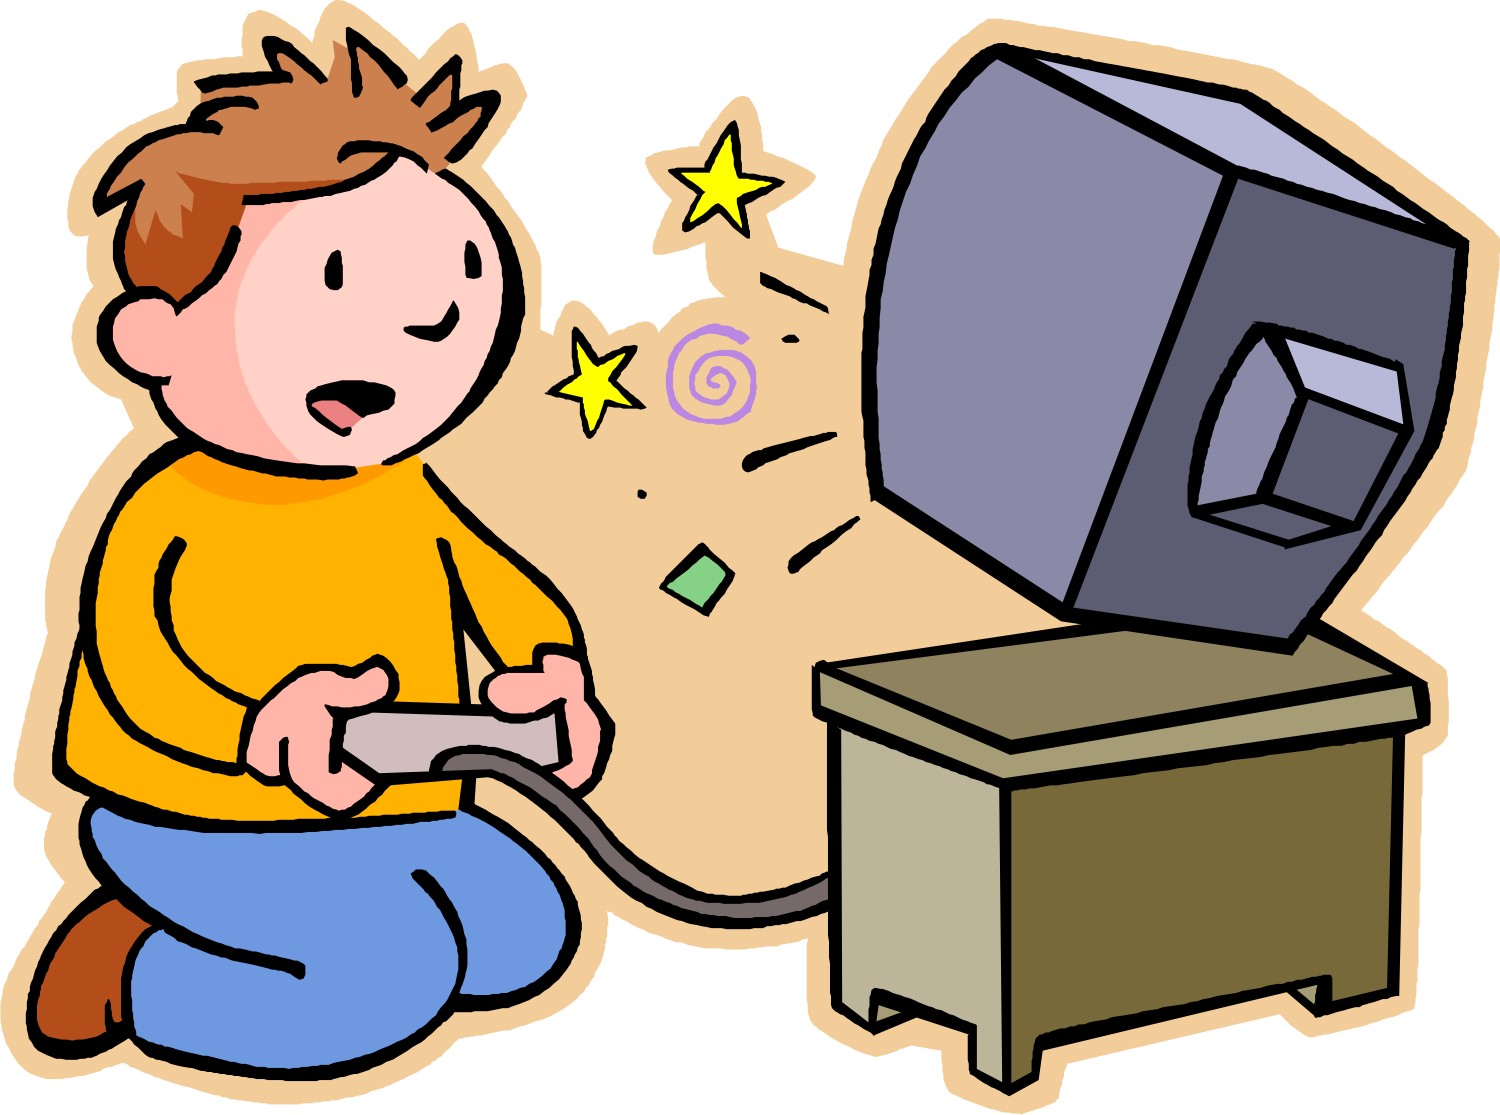 people playing video games clipart